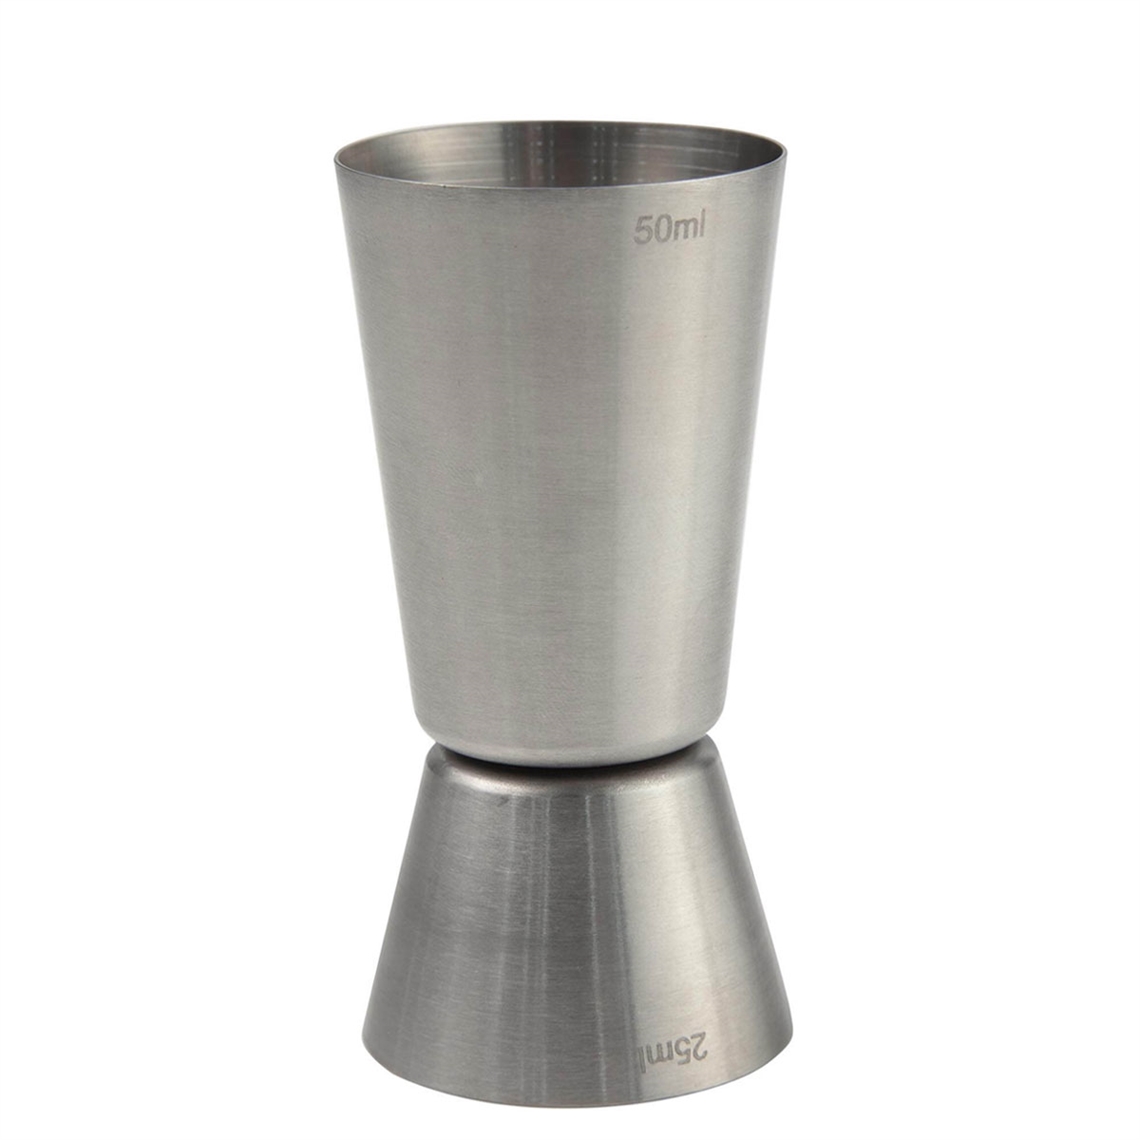 View more what you need to set up a wine bar / restaurant guide from our Spirit and Wine Bar Thimble Measures range